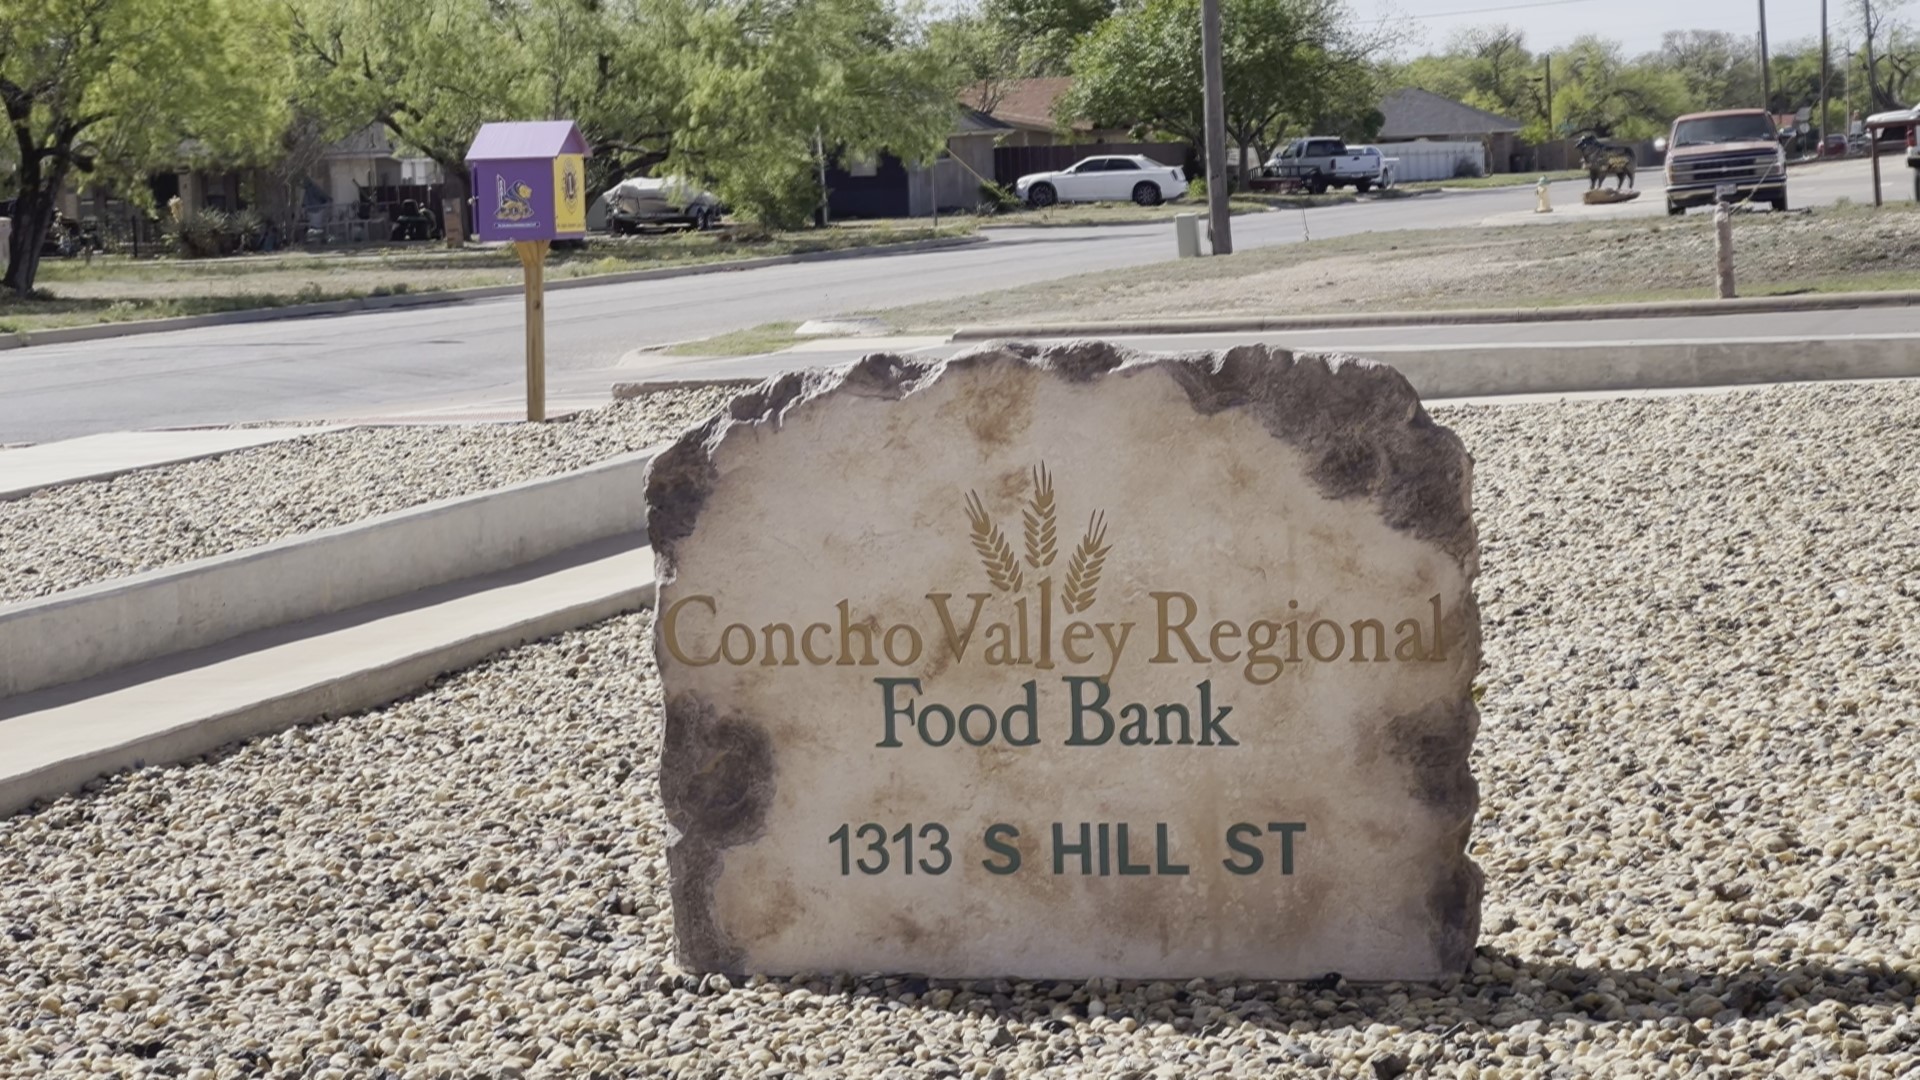 After struggling to serve West Texas communities, the Concho Valley Regional Food Bank is making changes to directly serve those in need.